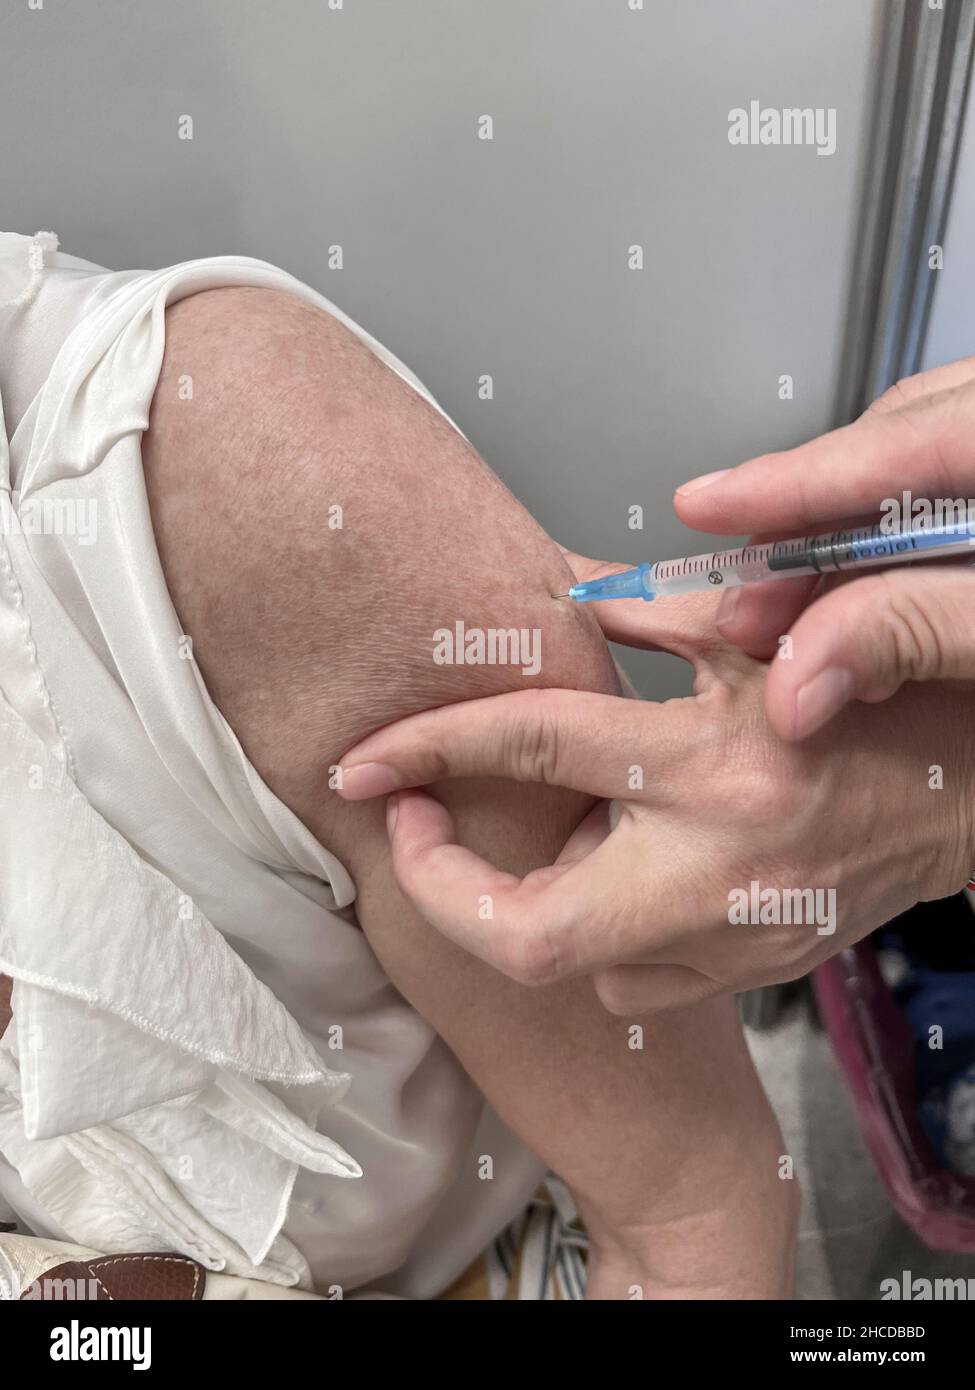 Vaccination jab in arm Stock Photo